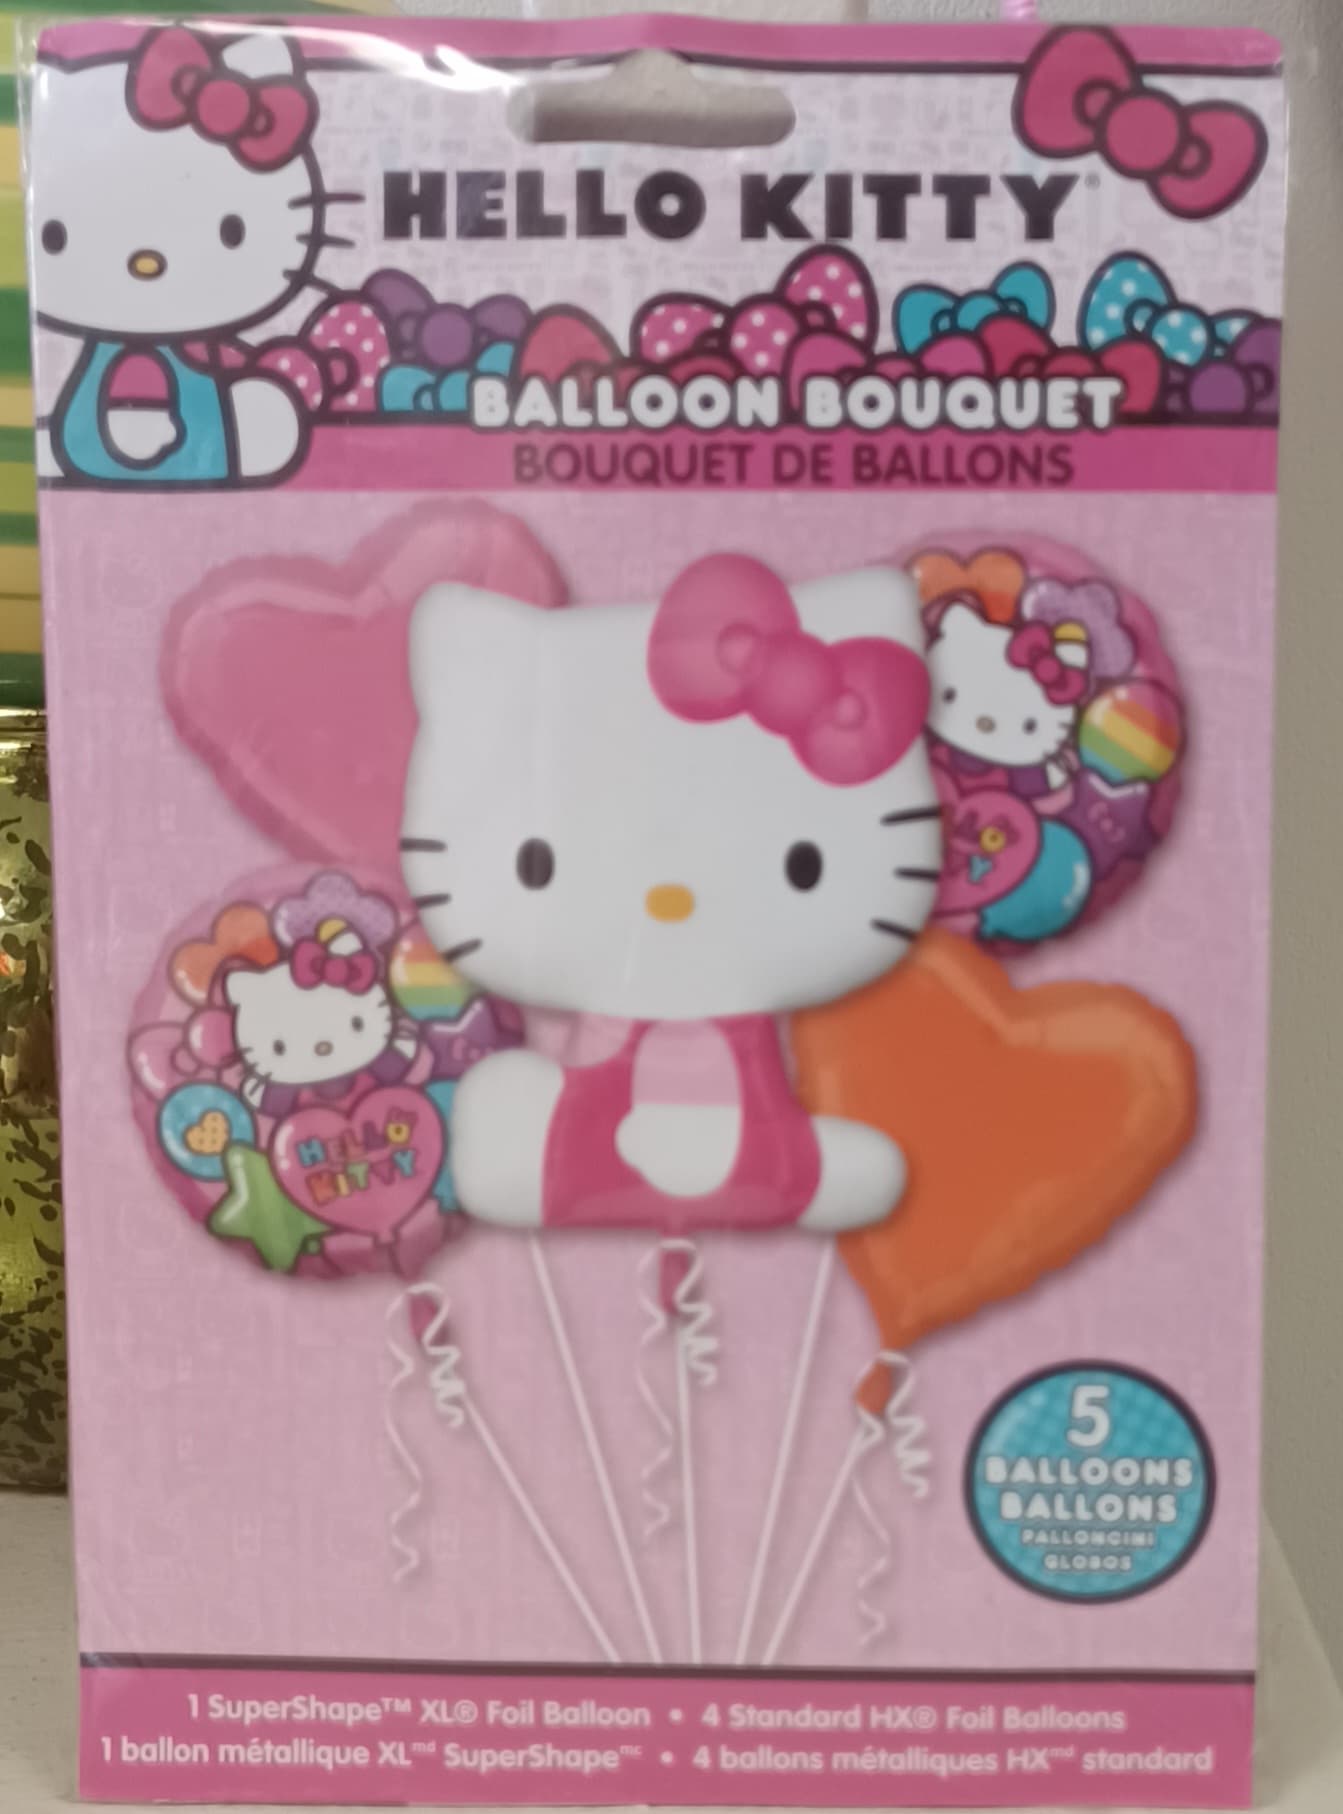 Hello Kitty Balloon Bouquet by Zontini Event Decorators Flowers and Balloons